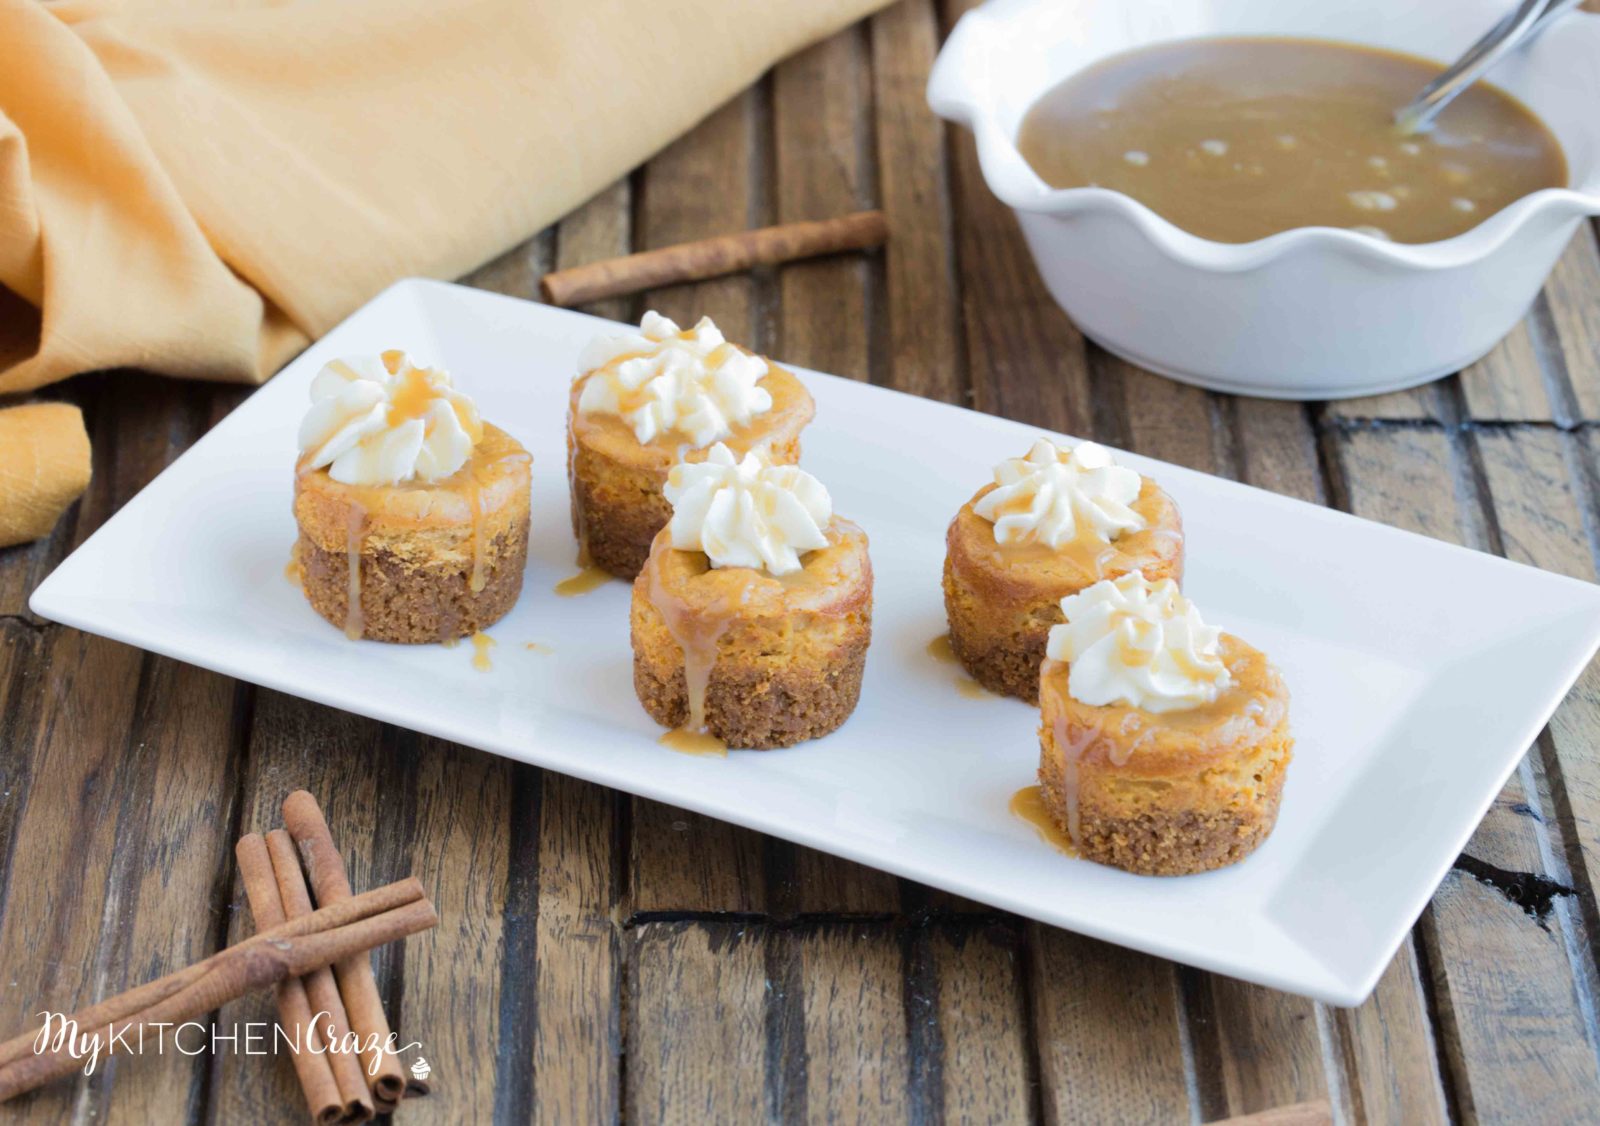 Mini Pumpkin Cheesecakes are the perfect fall dessert! Creamy cheesecake has the perfect hint of pumpkin, topped with homemade whipped cream and caramel sauce. It doesn't get much better than these cute mini cheesecakes this season!